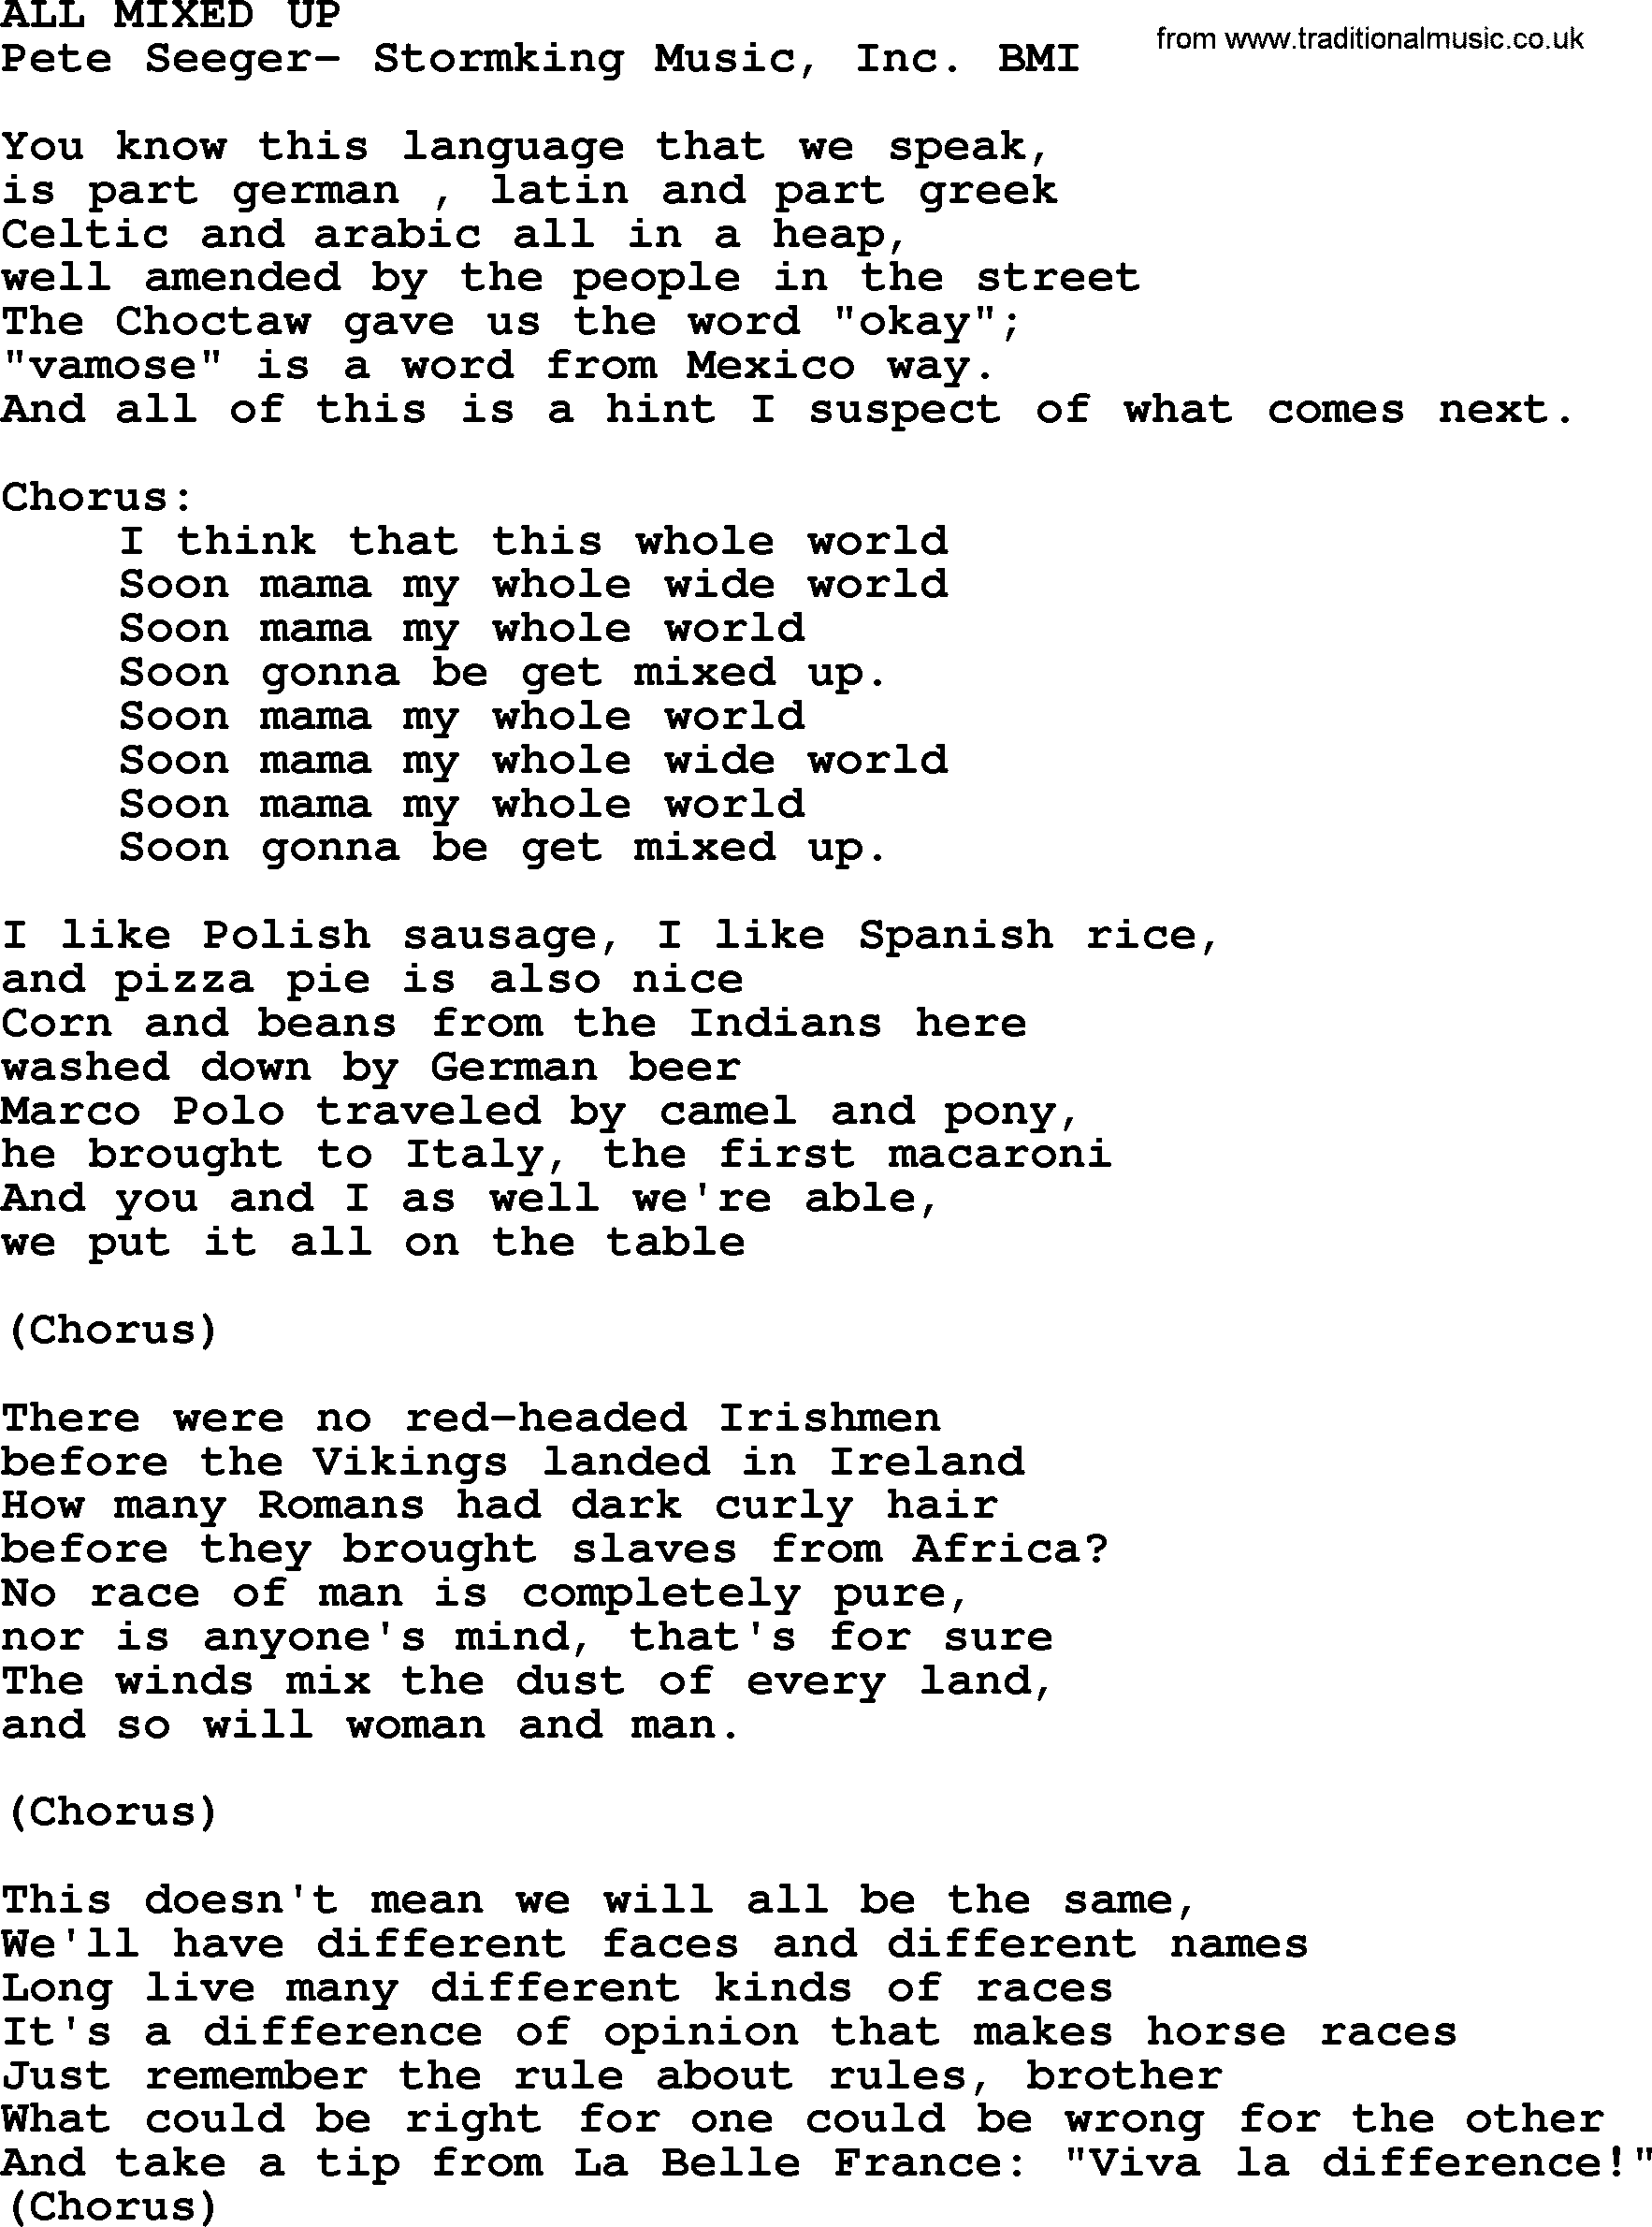 Peter, Paul and Mary song All Mixed Up lyrics